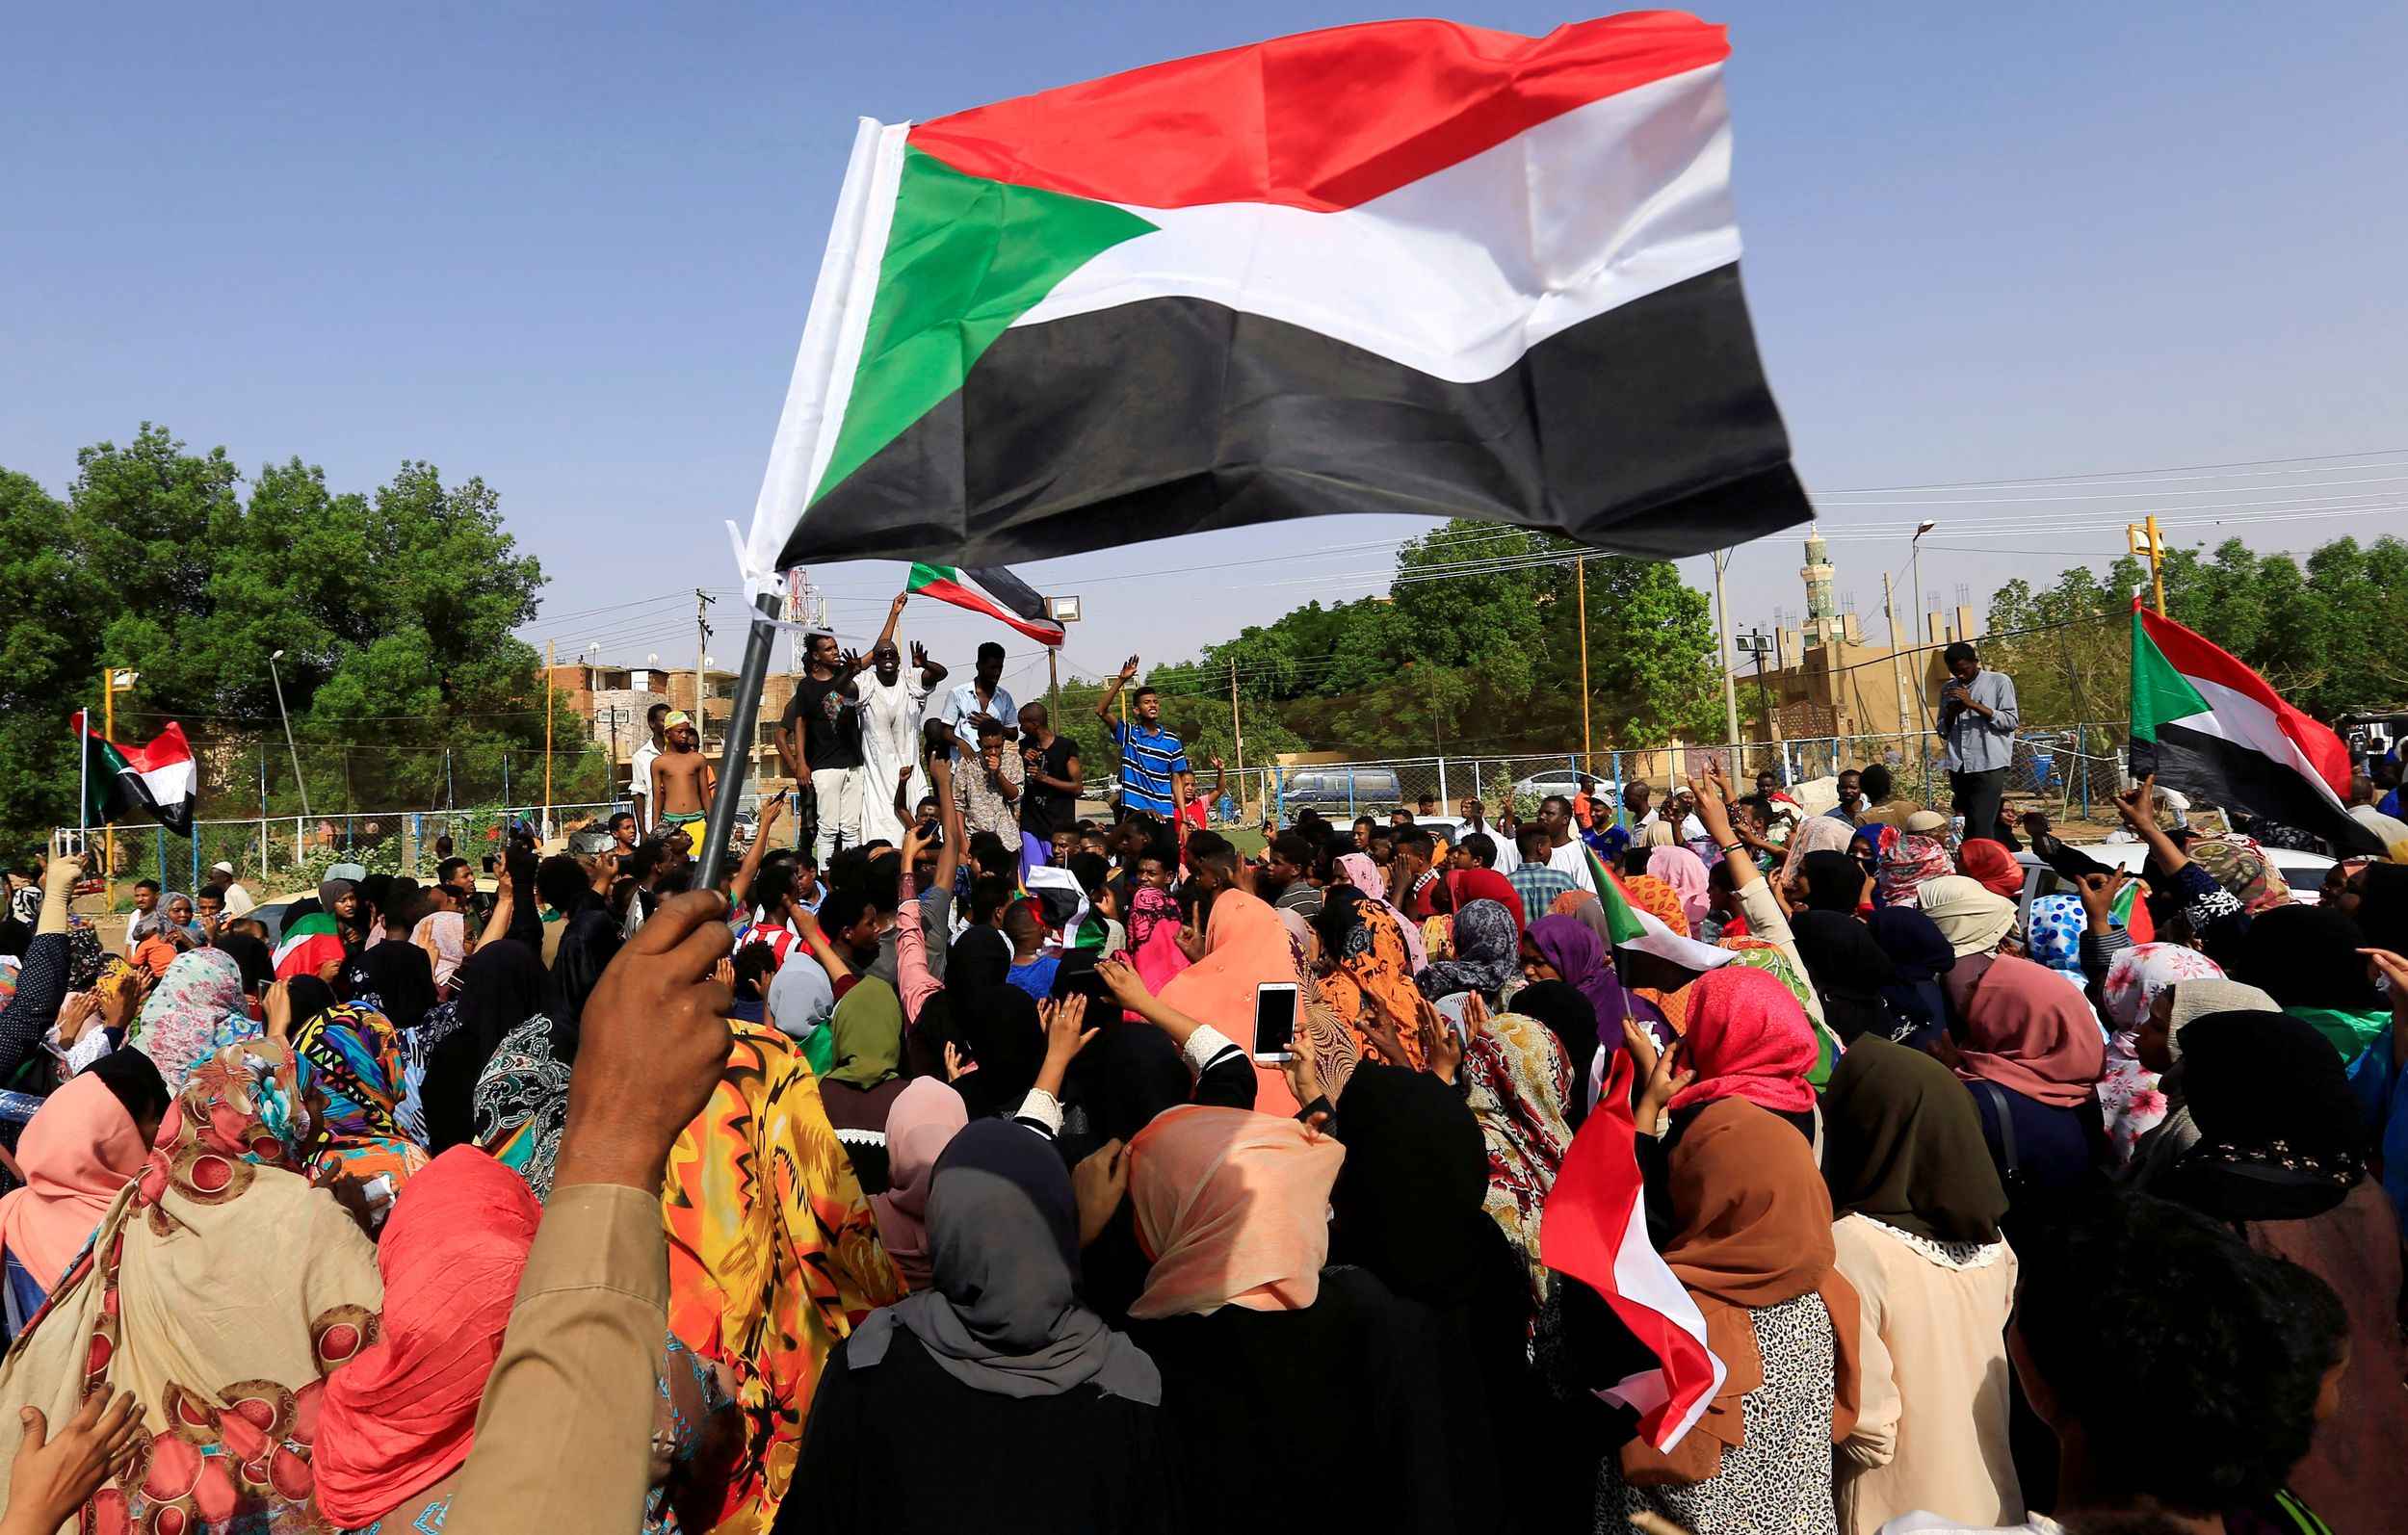 What We’re Watching: Sudan softens laws, Duda wins by a whisker in Poland, protests erupt in Russia's Far East